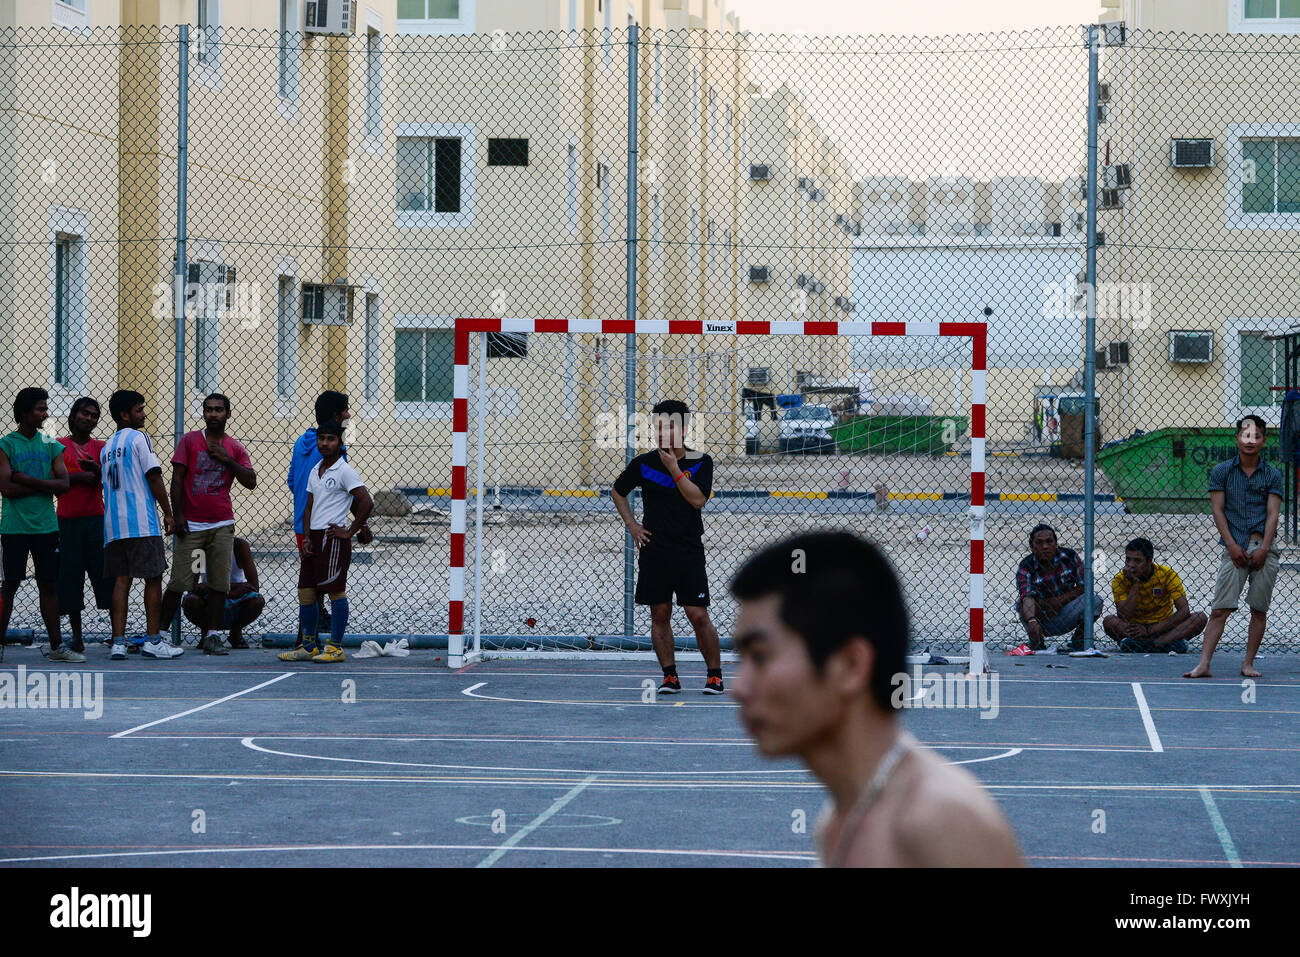 QATAR, Doha, industrial complex, housing camp for migrant worker outside the city, sports place, worker from Vietnam and Philippines play football at sports ground Stock Photo